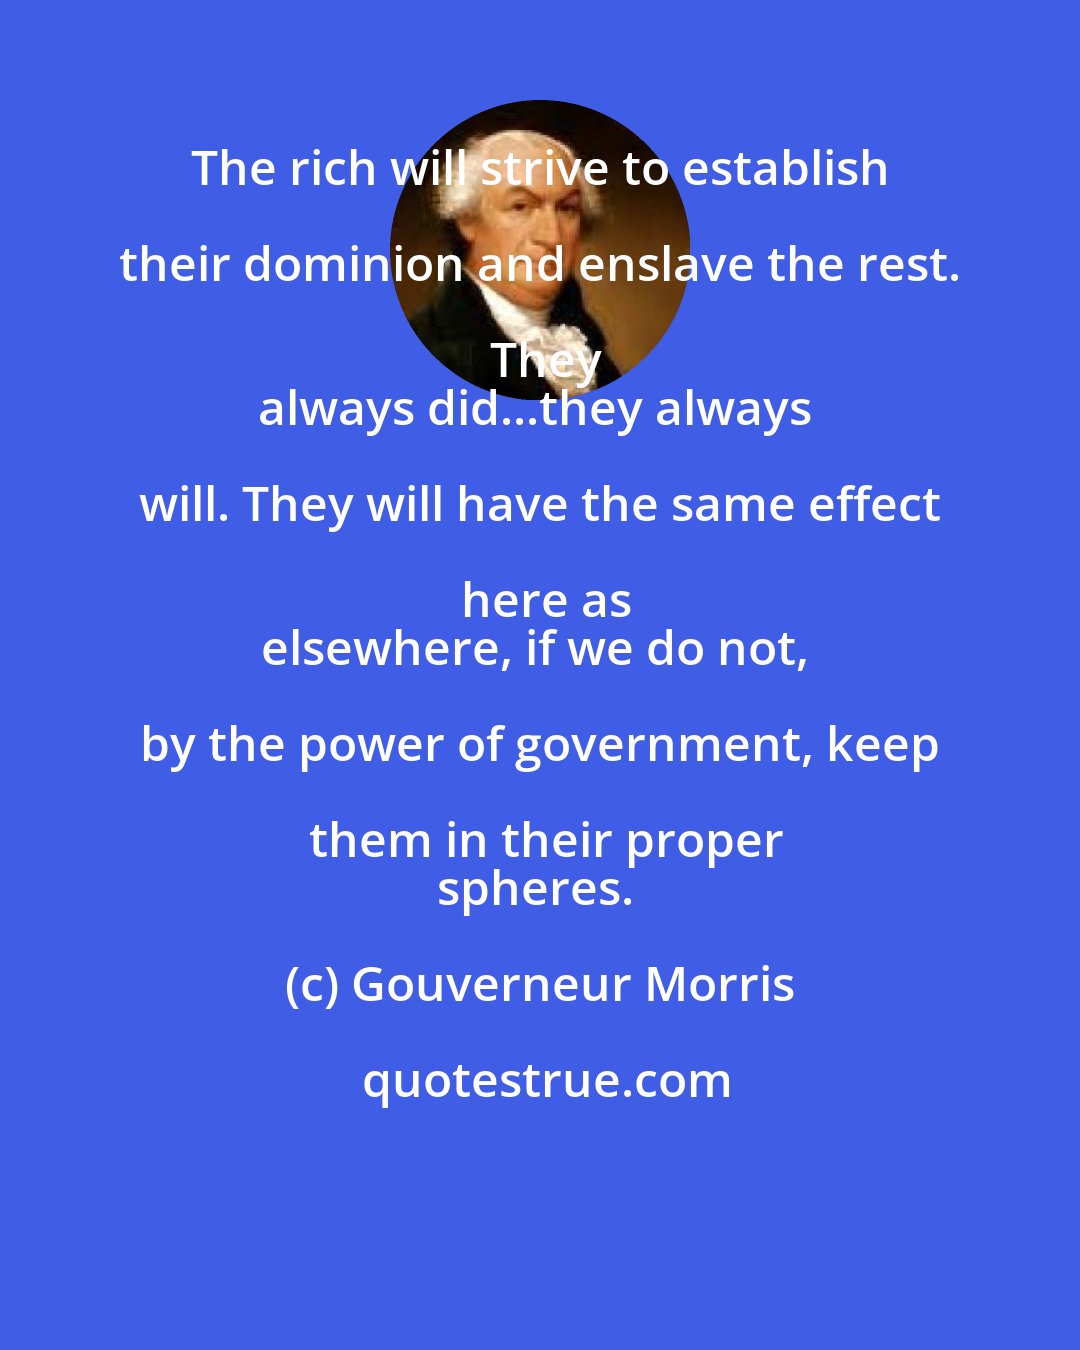 Gouverneur Morris: The rich will strive to establish their dominion and enslave the rest. They
always did...they always will. They will have the same effect here as
elsewhere, if we do not, by the power of government, keep them in their proper
spheres.